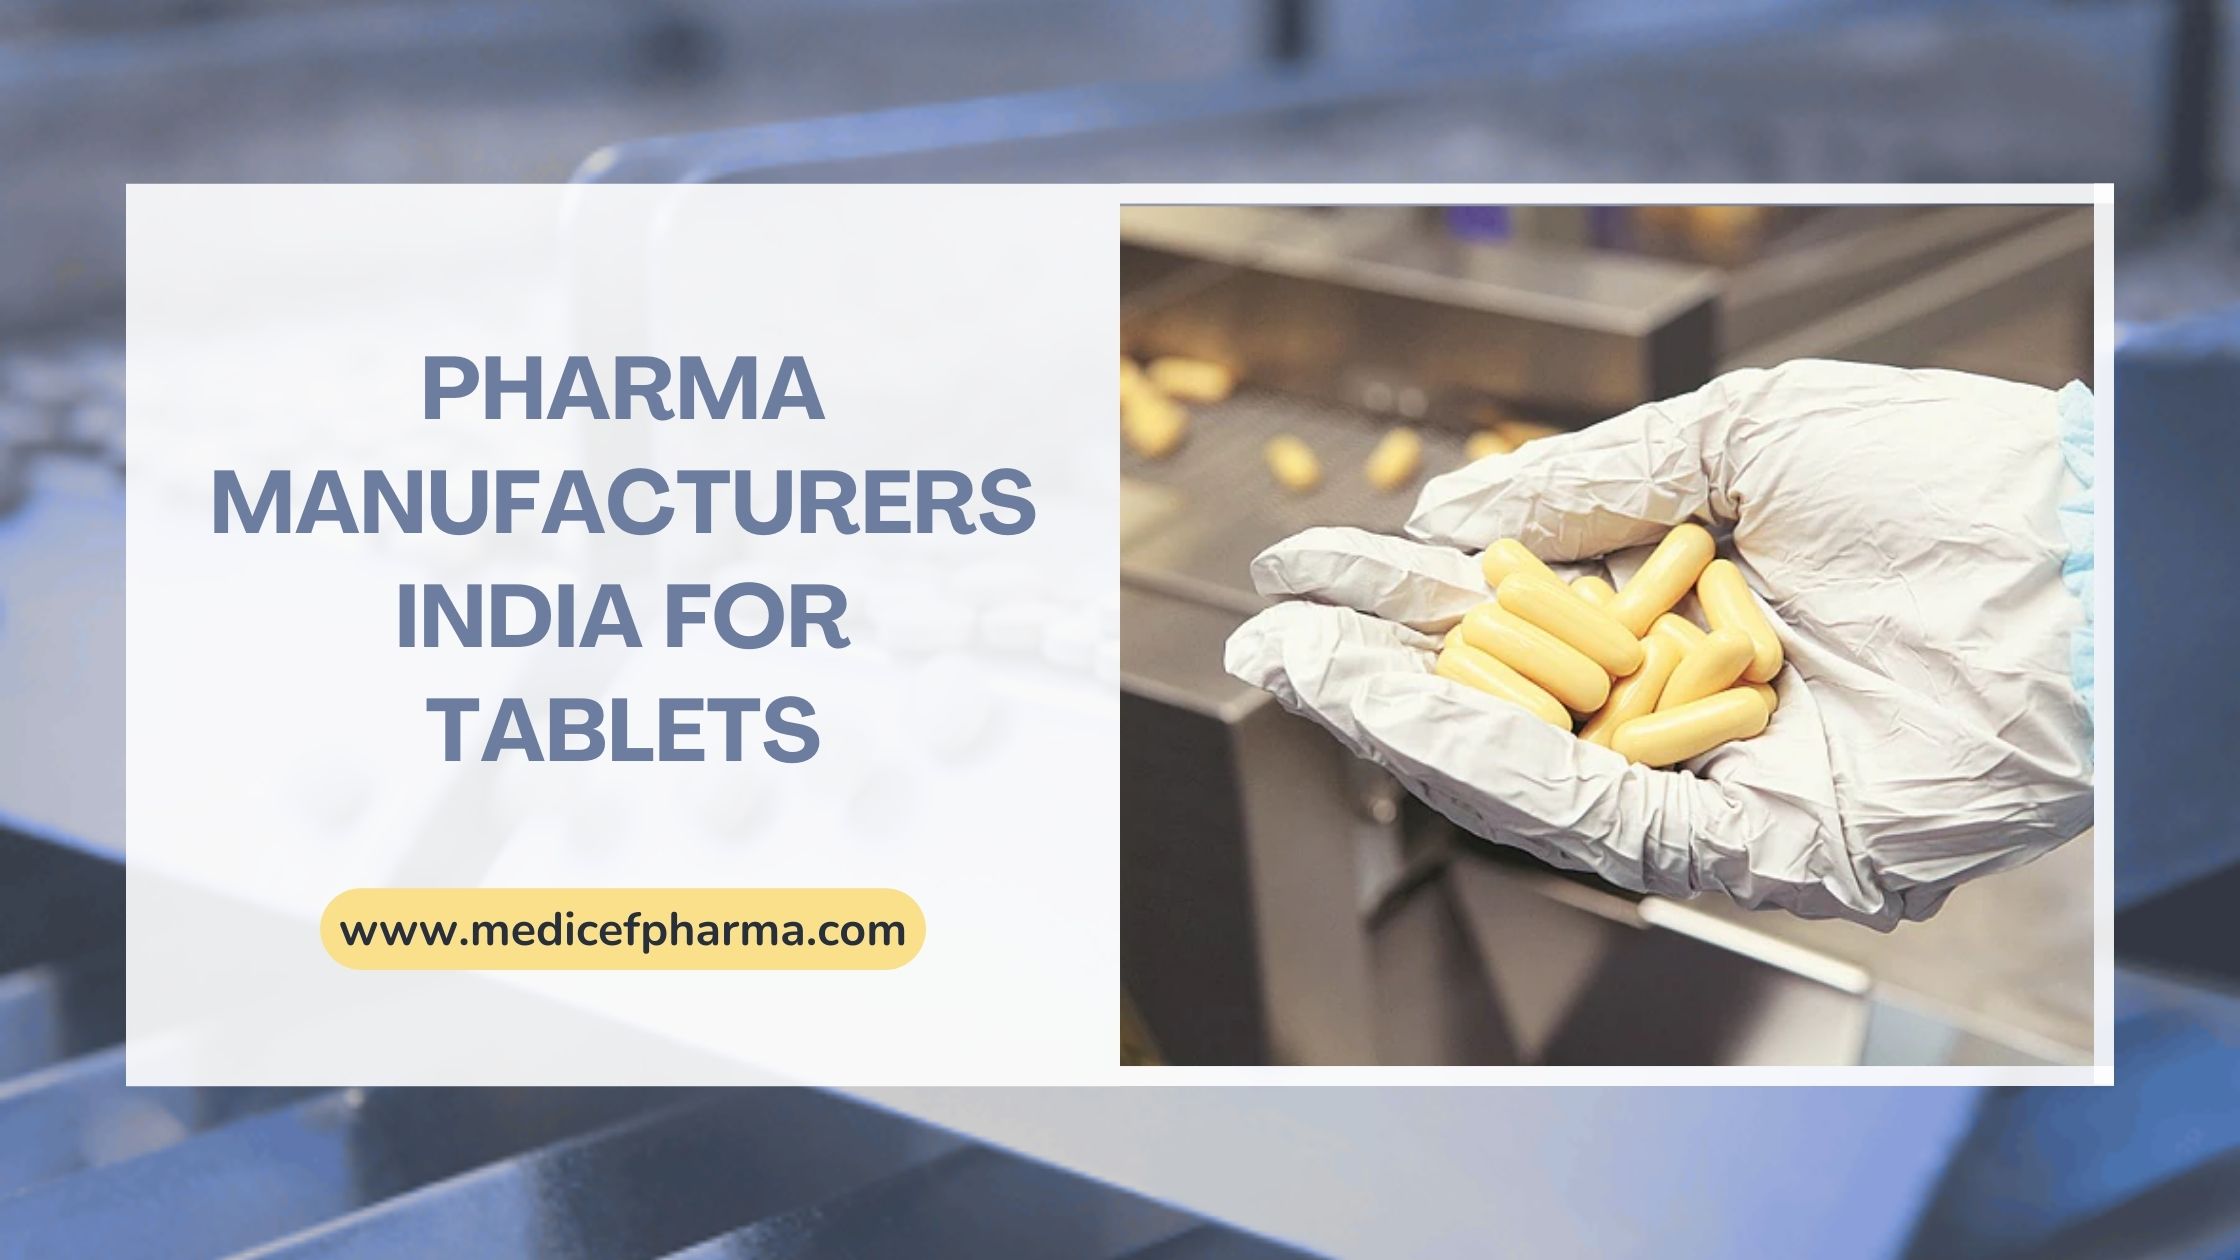 5 Reasons for Growth of Trust in Pharma Manufacturers India for Tablets!